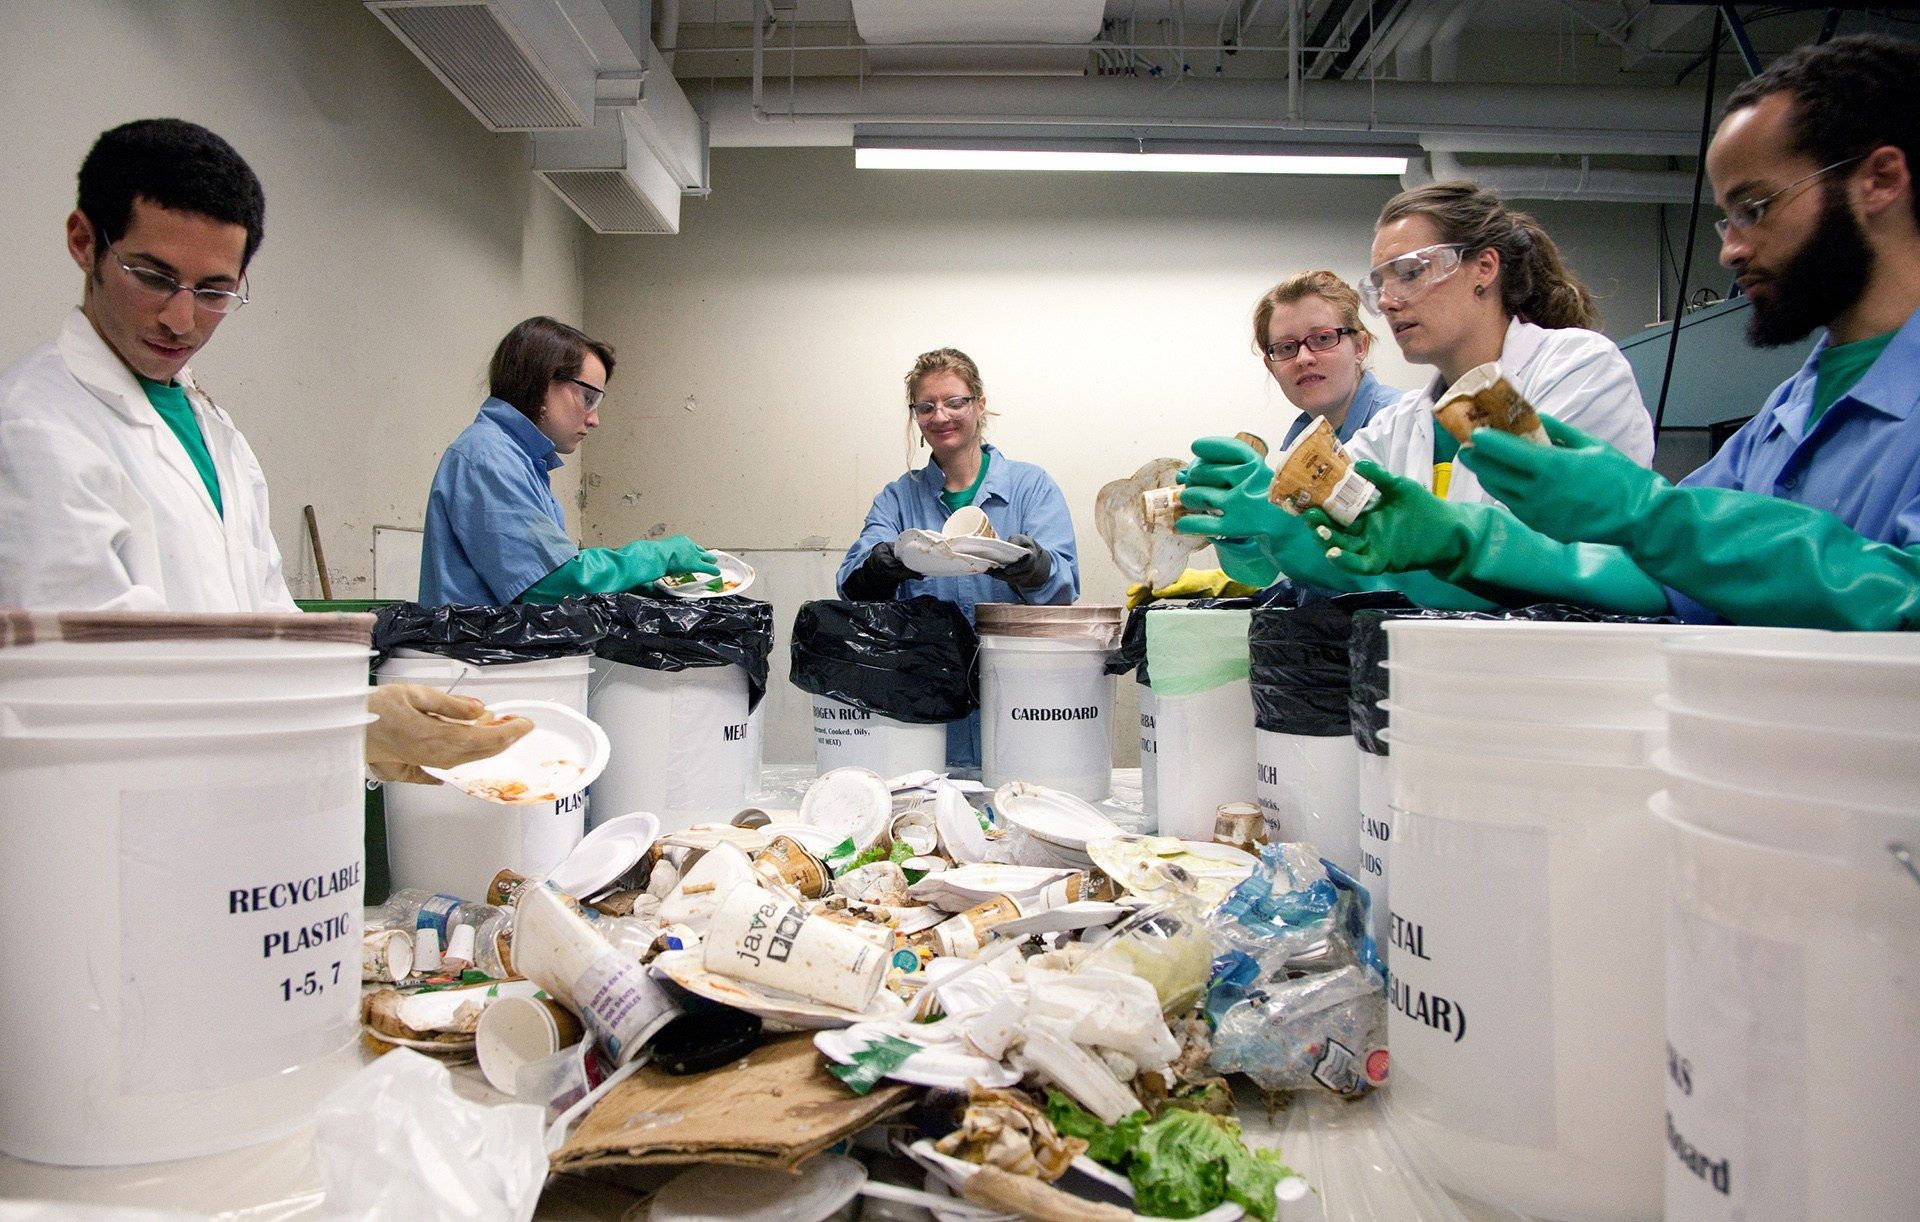 Six people stand around a table facing inward wearing personal protective gear and sorting waste into buckets.